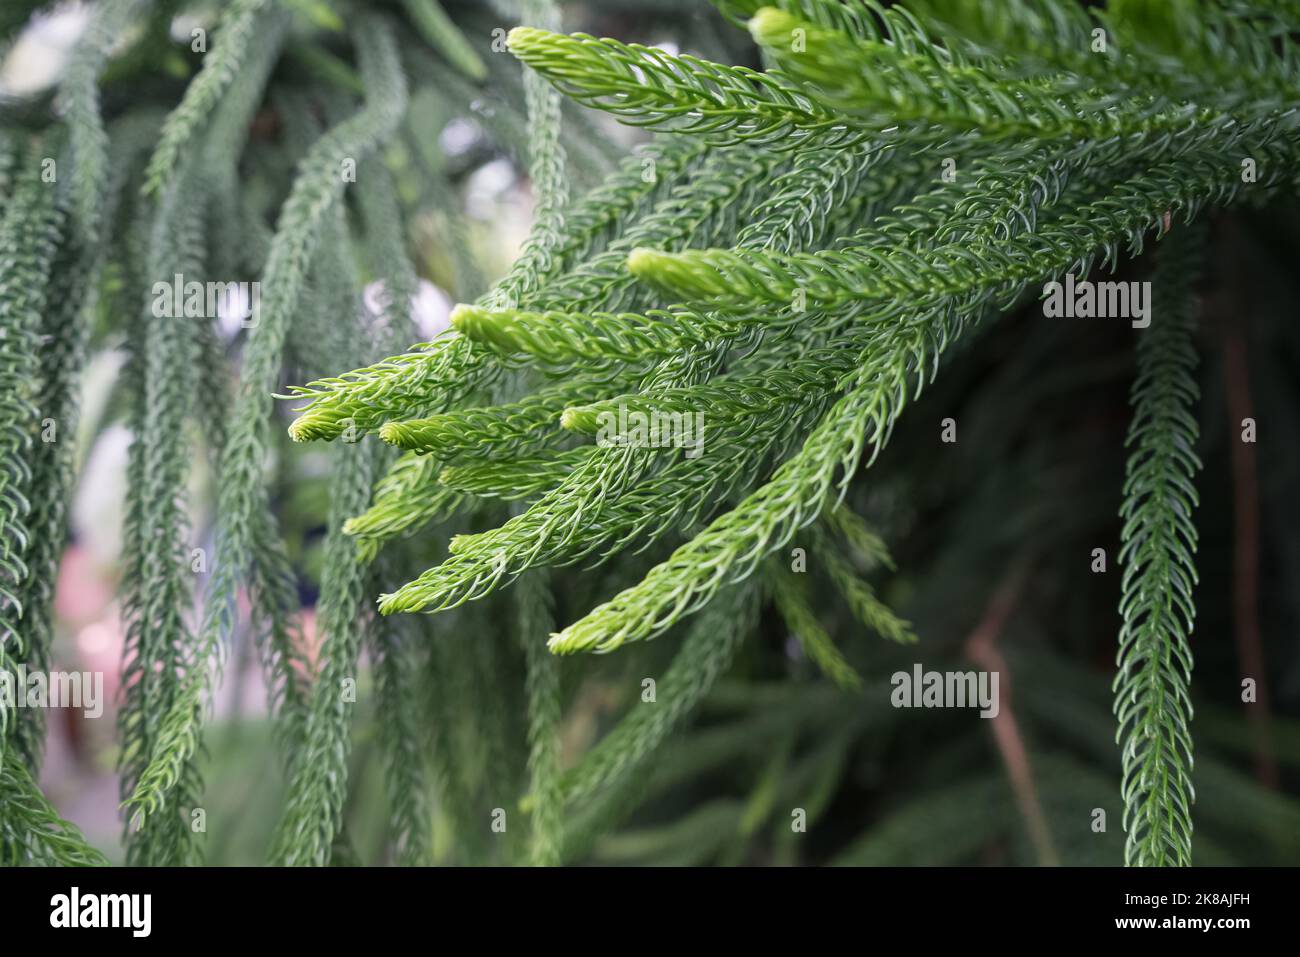 close up view of Araucaria heterophylla Norfolk island pine branches Stock Photo